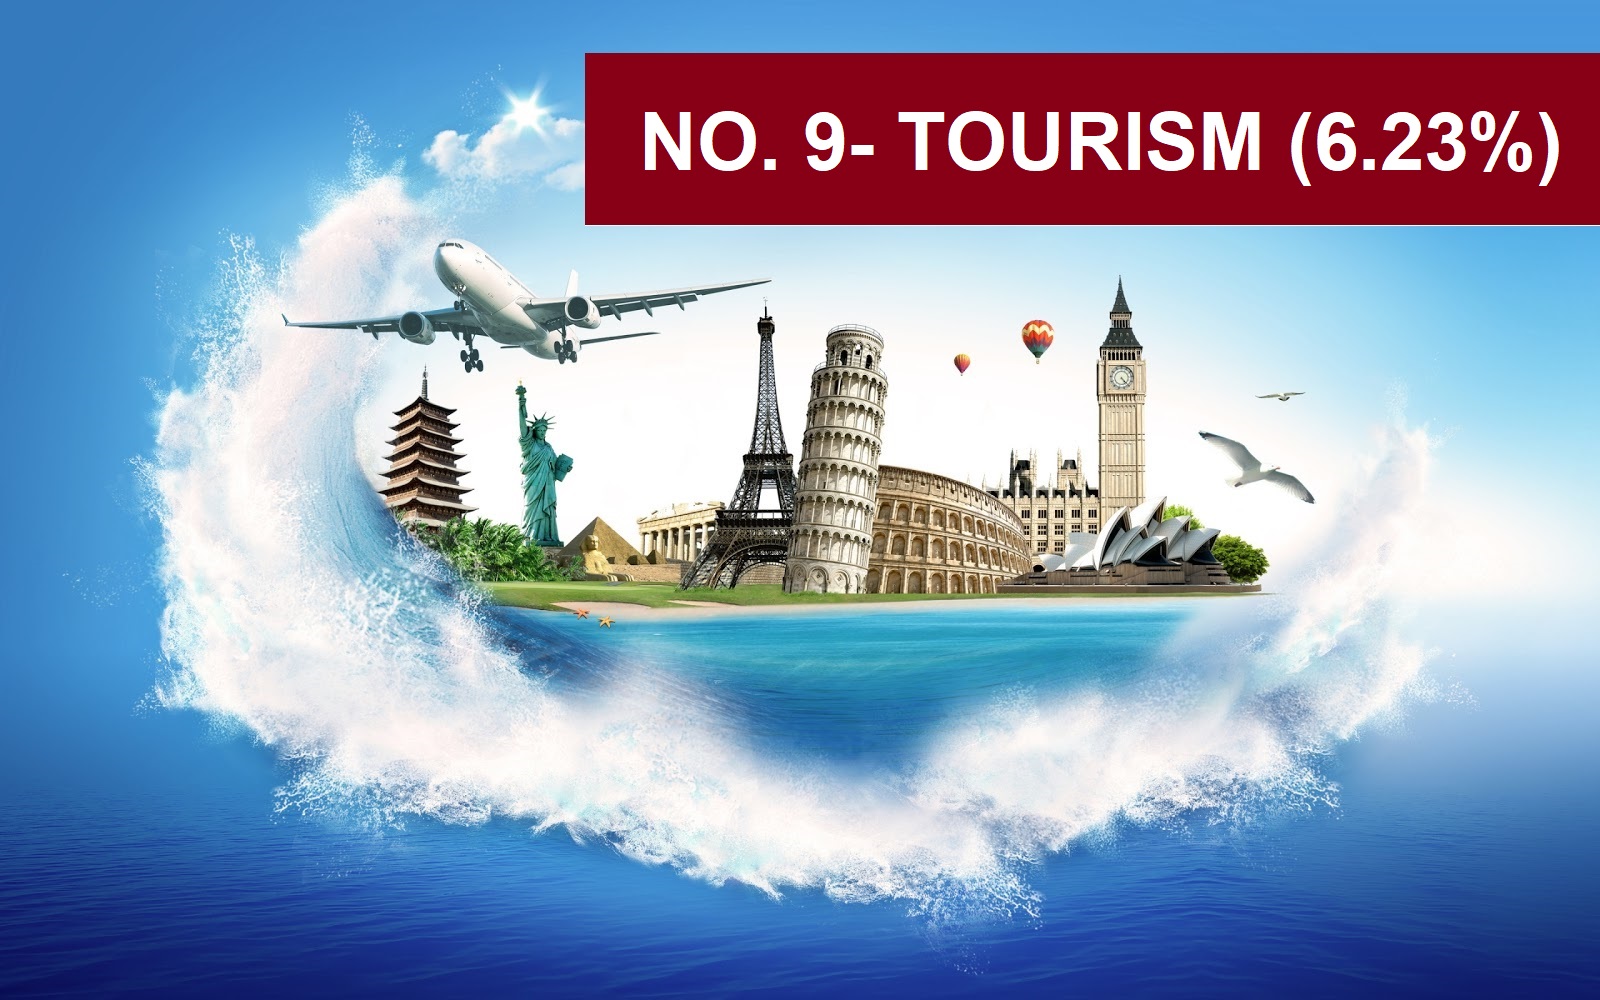 TOURISM INDUSTRY IN INDIA